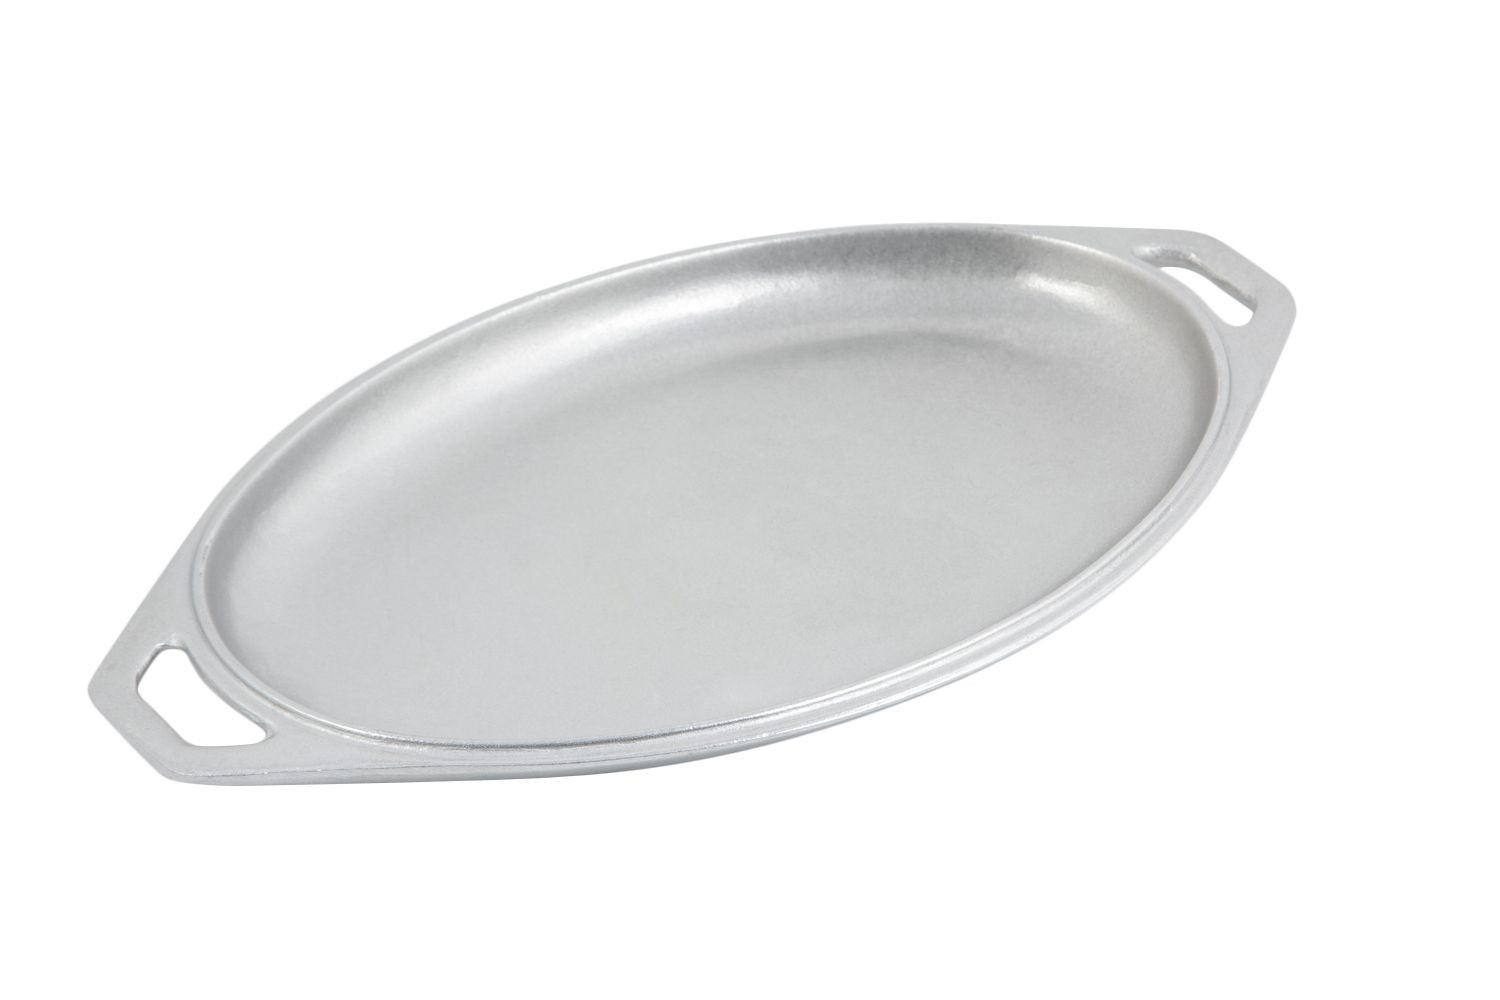 Bon Chef 2006P Oval Serving Platter Cover, Pewter Glo 9" x 15", Set of 3